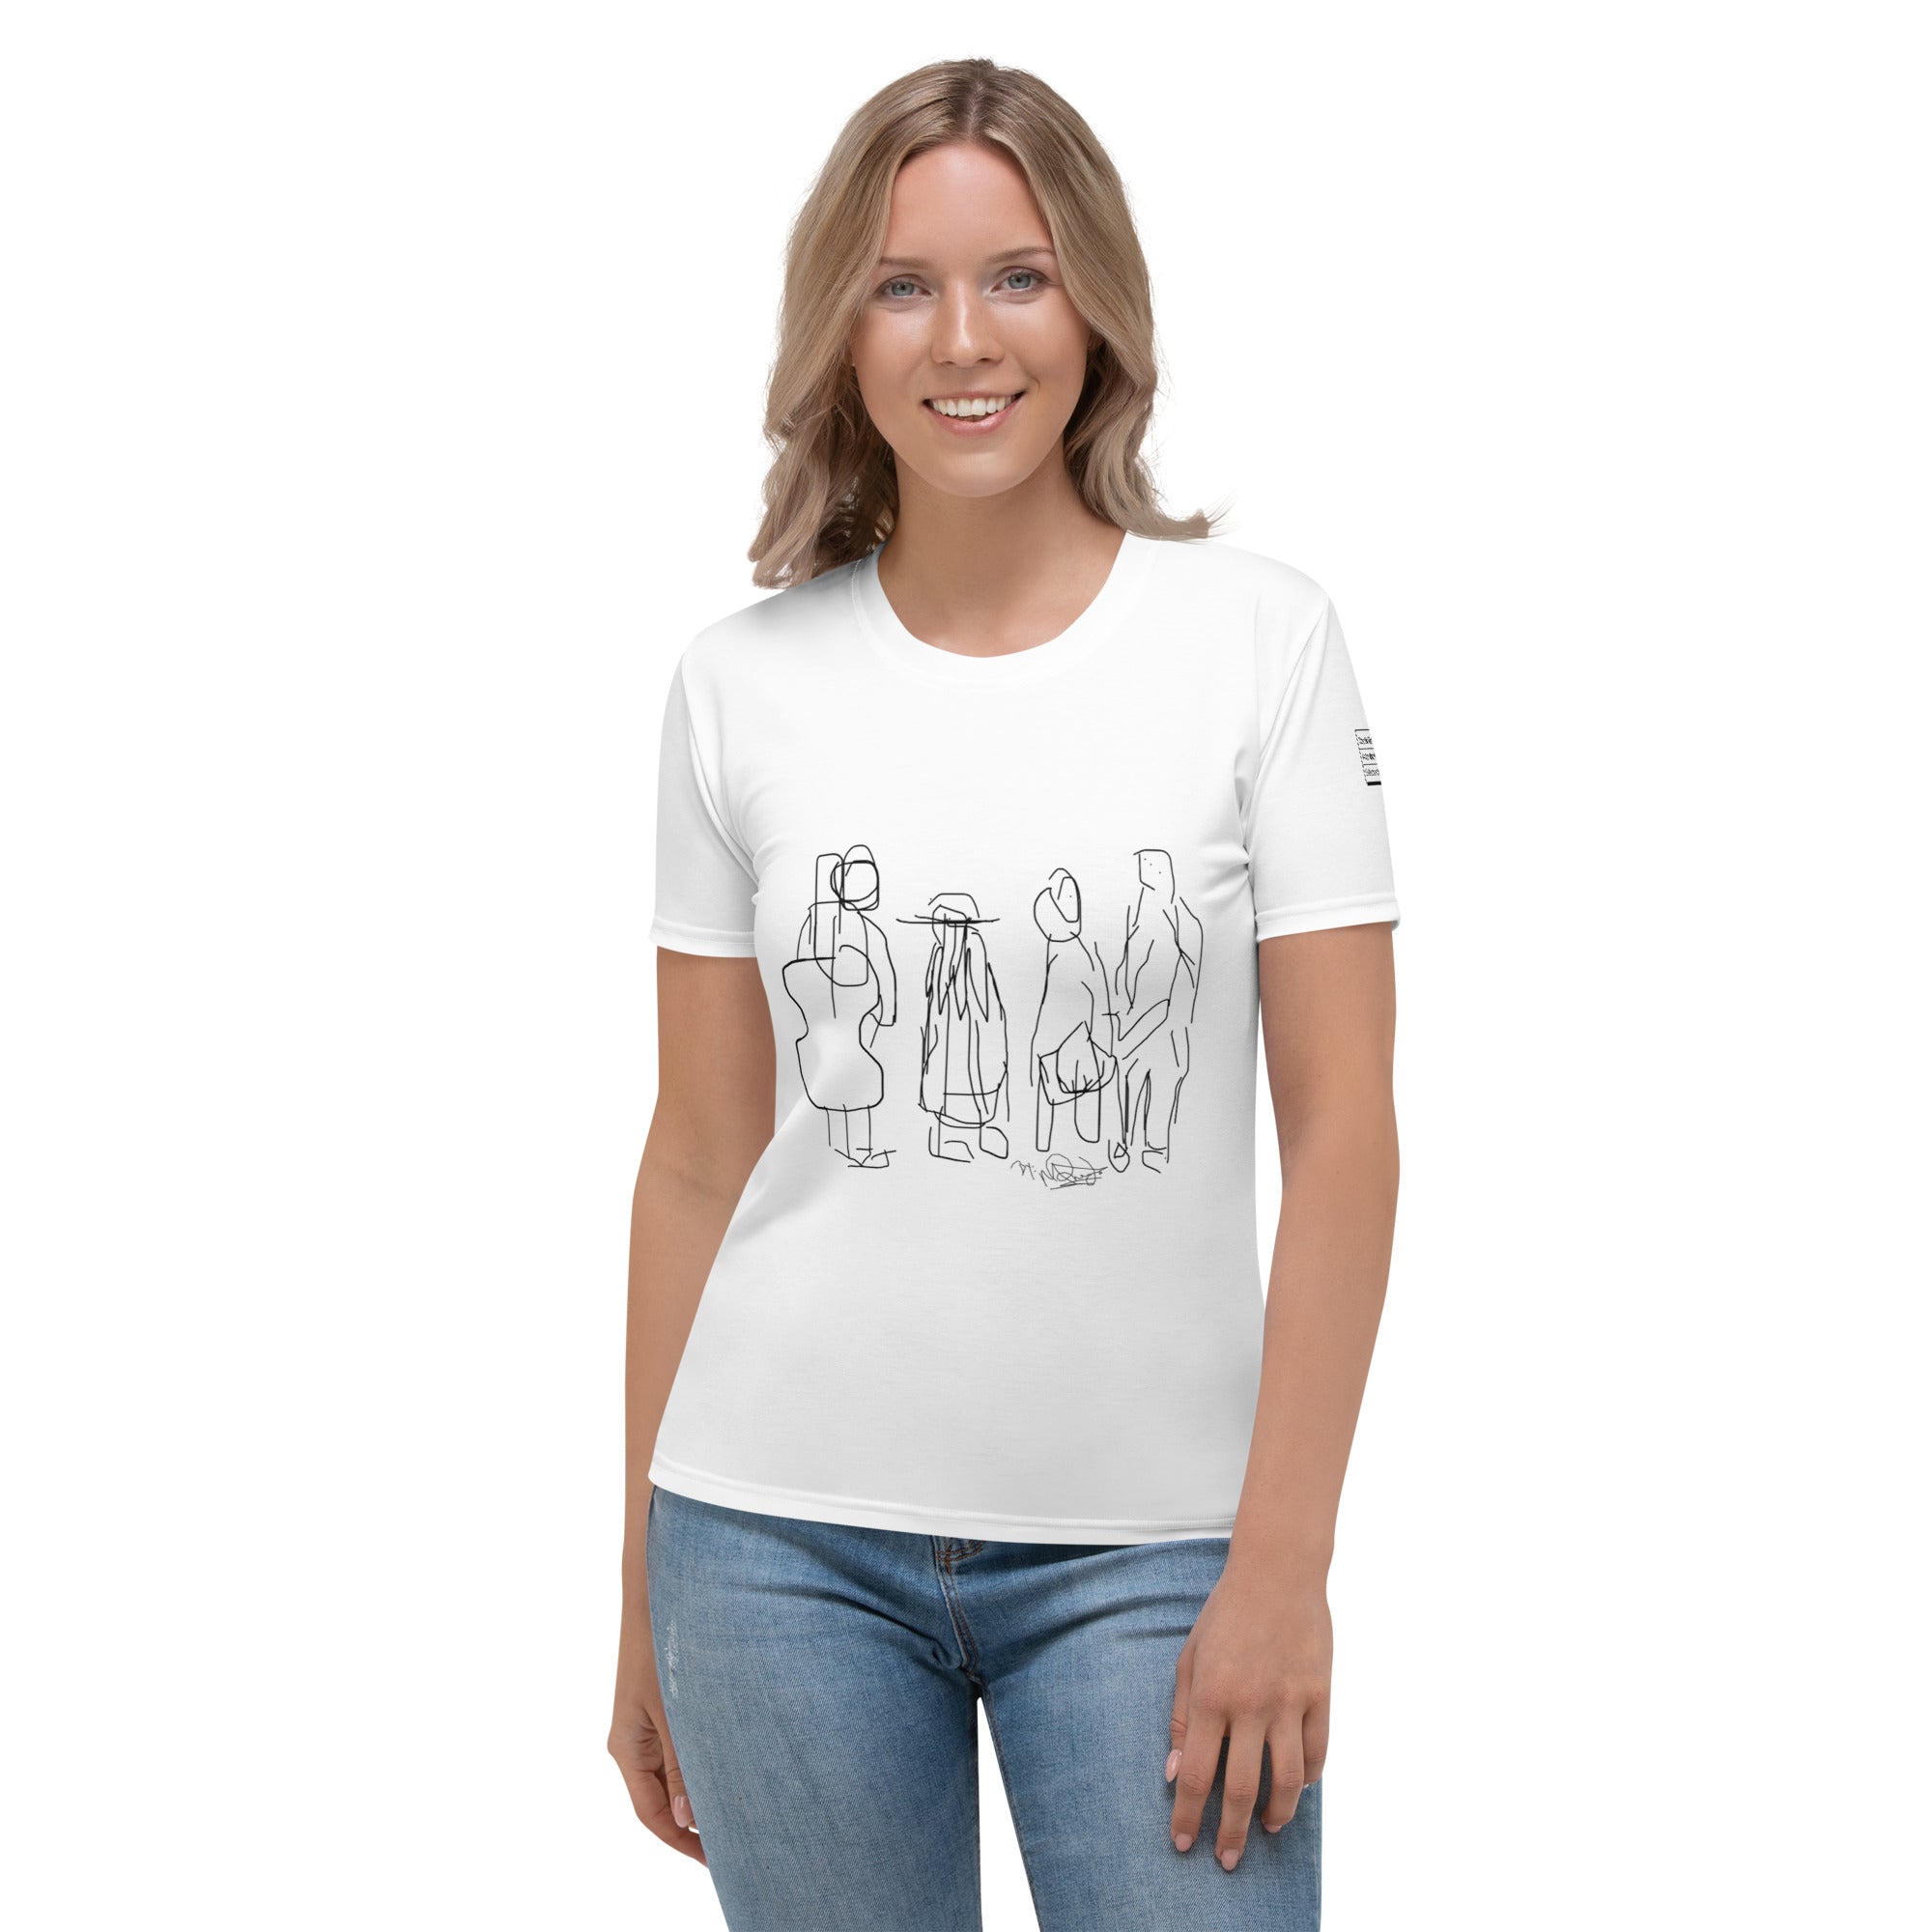 Maxi Priest - Limited Edition Art "On The Road" - Women's T-shirt